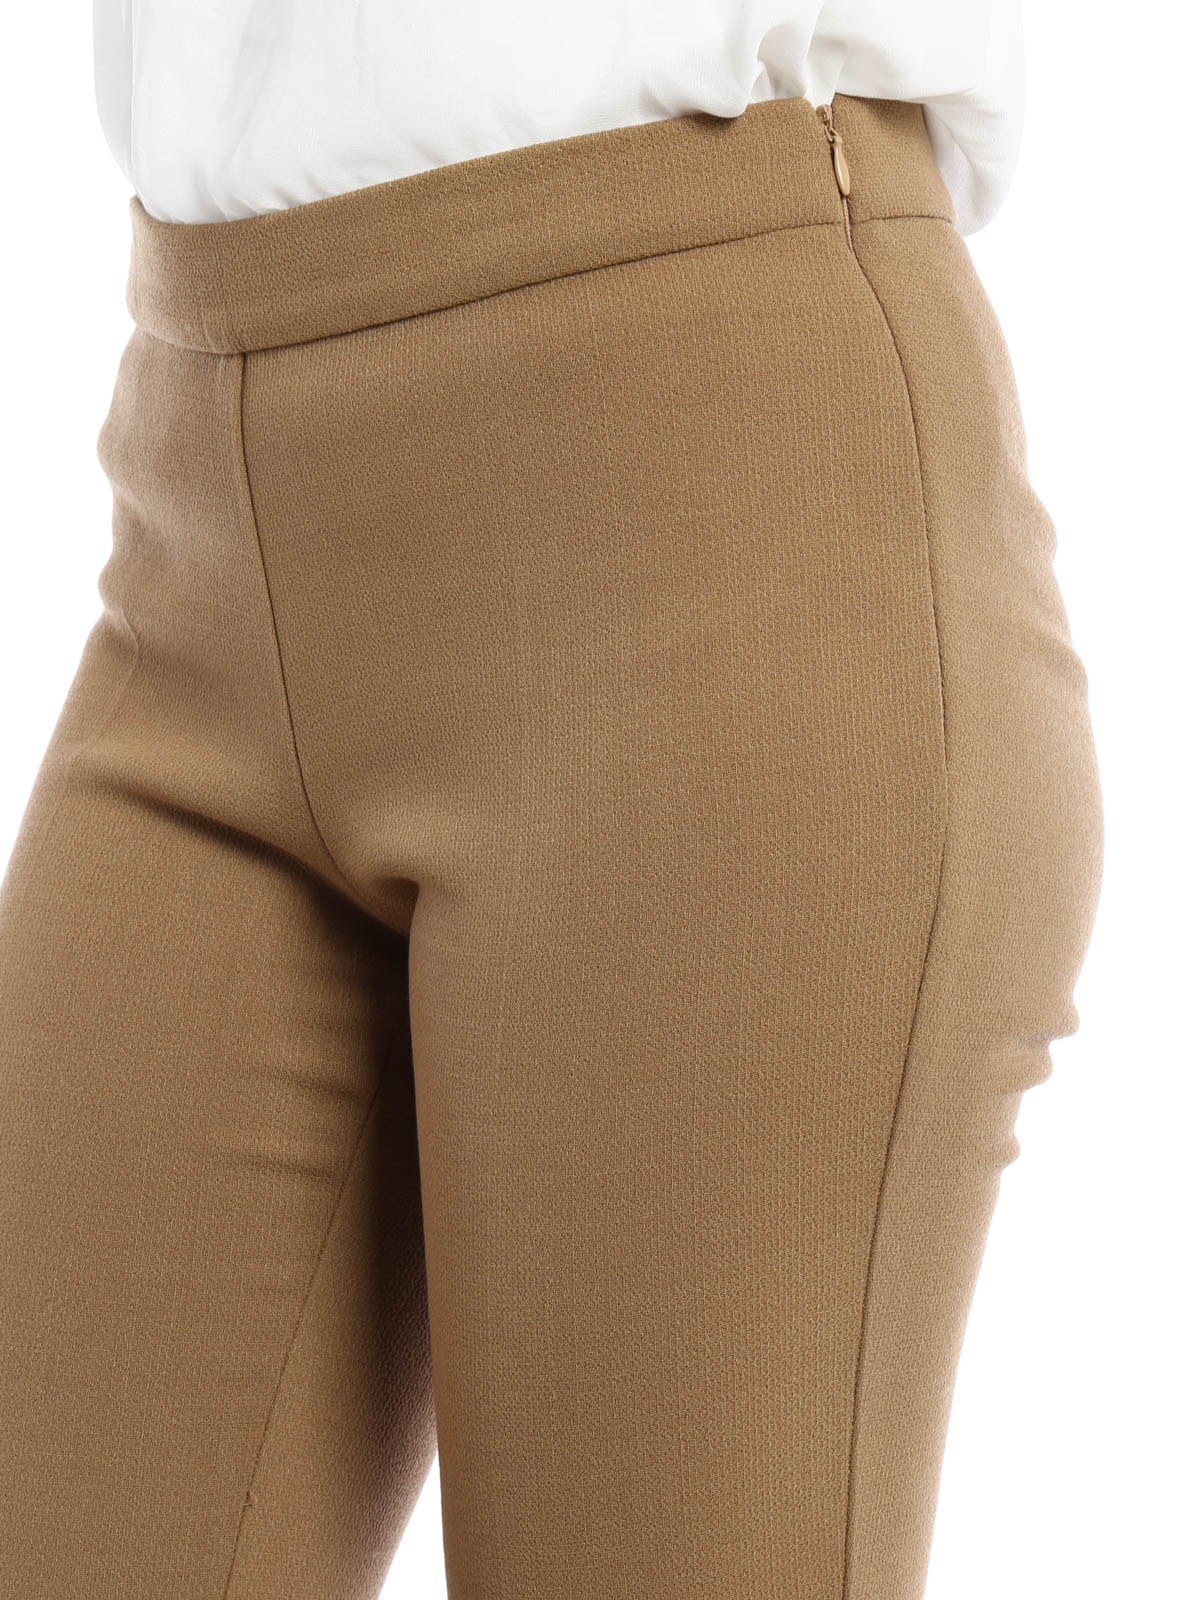 REISS STONE COLOR STRAIGHT LEG CREPE TROUSERS  Lady Selection Inc